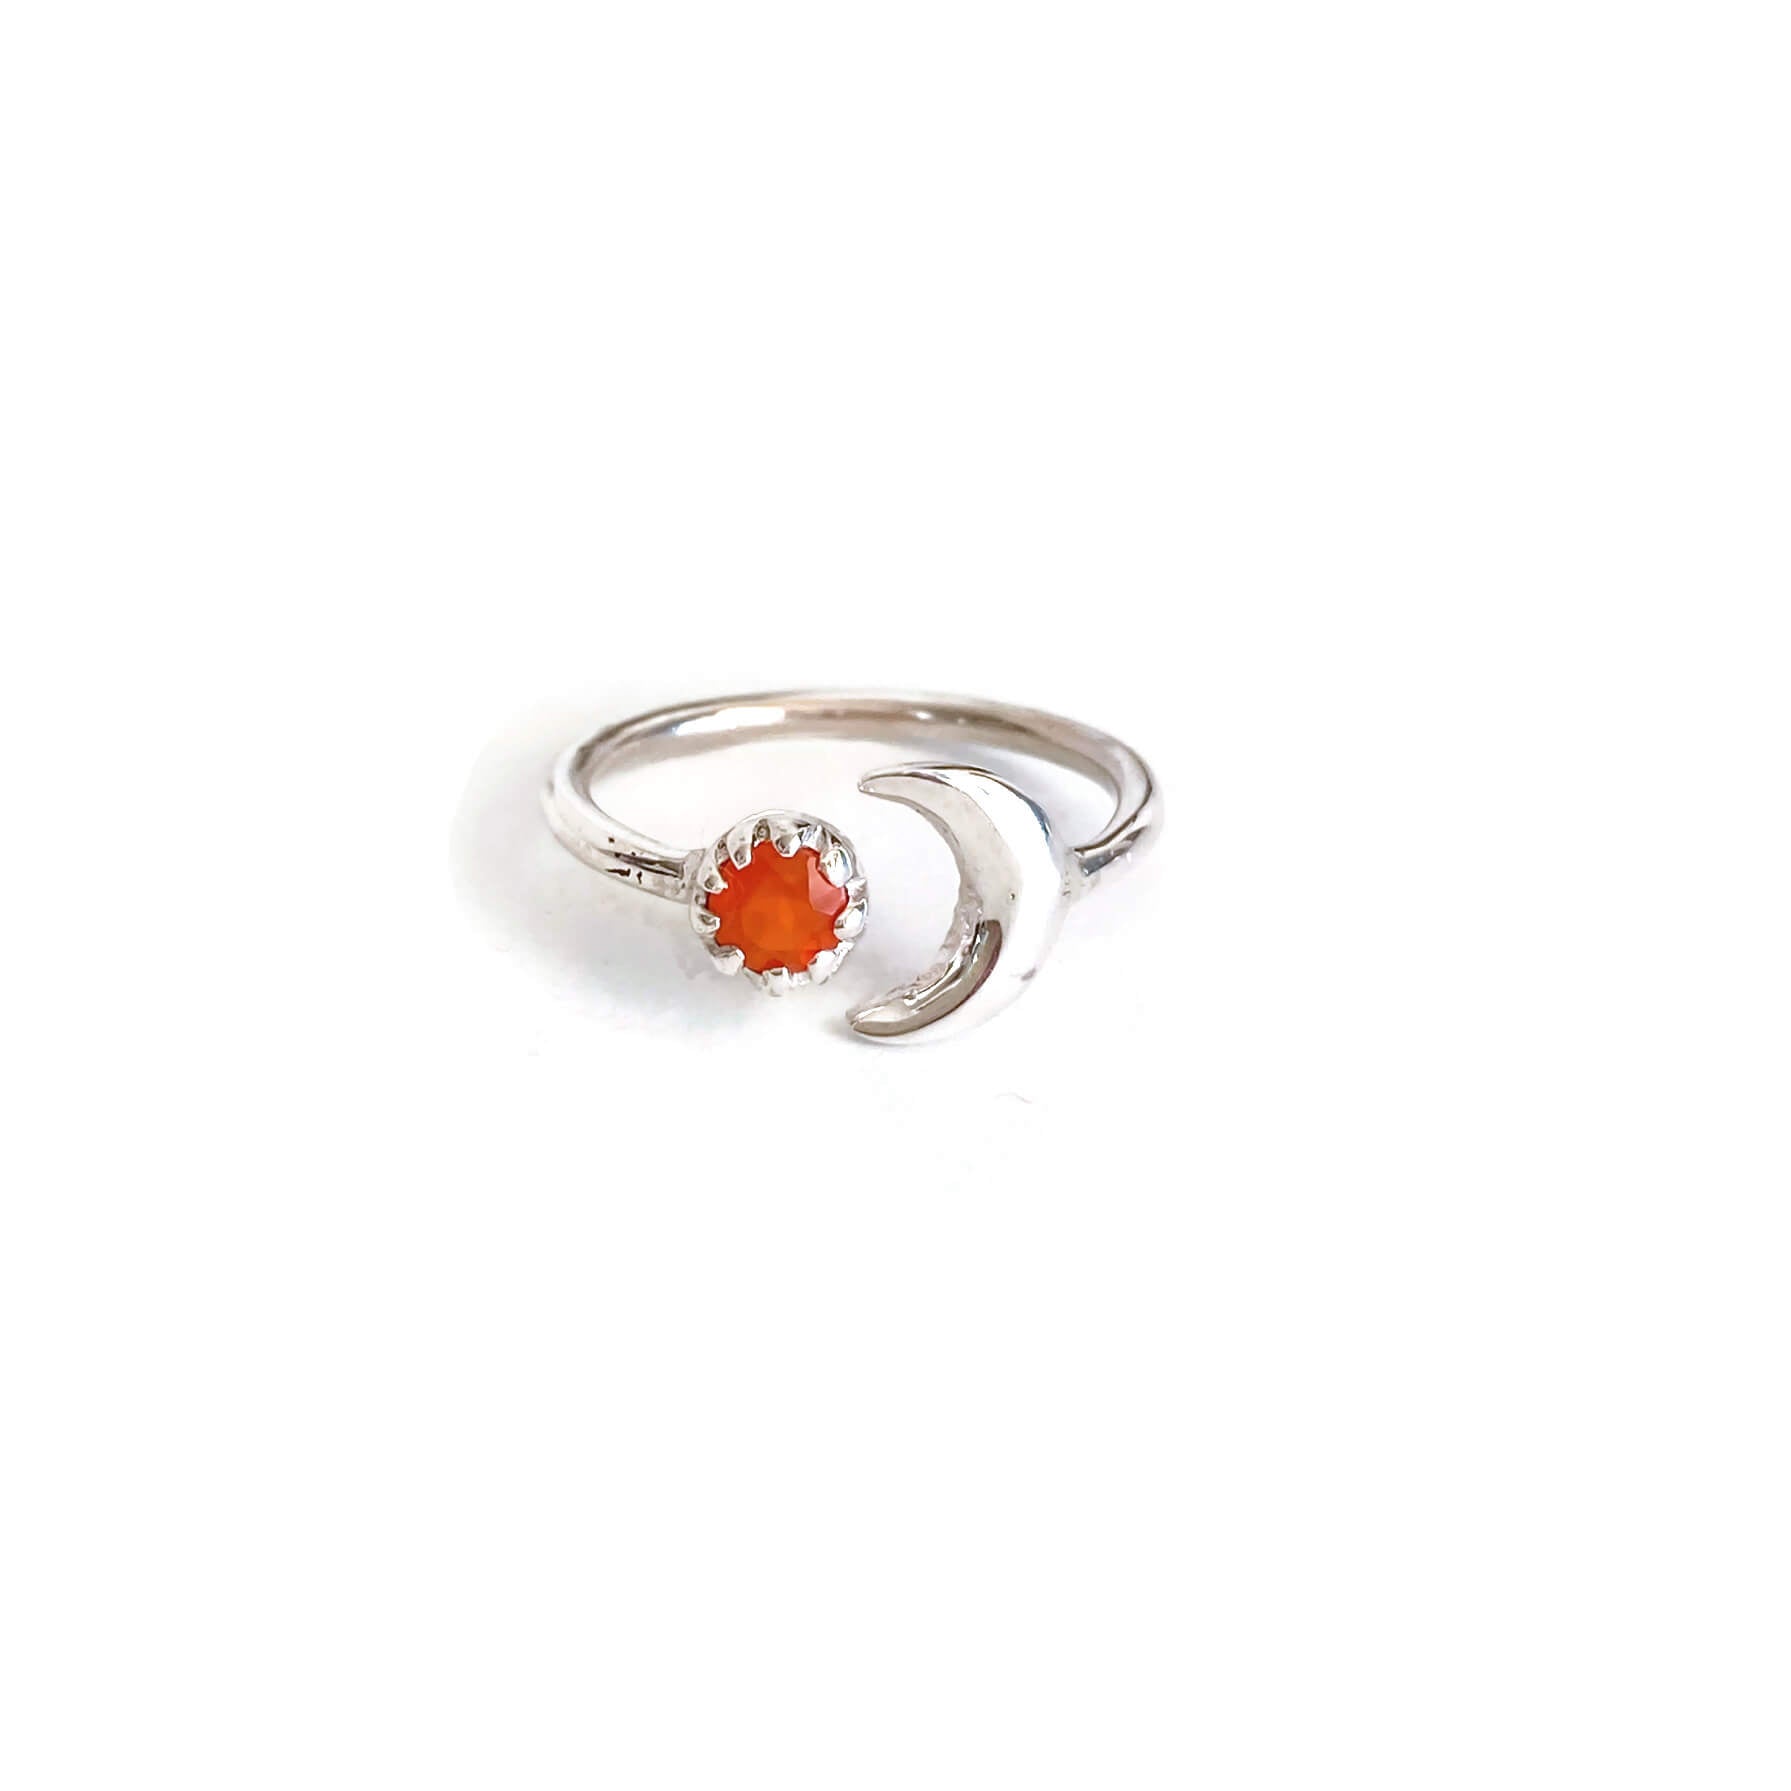 This is a sterling silver carnelian and moon ring. It's made of real carnelian crystal and sterling silver.